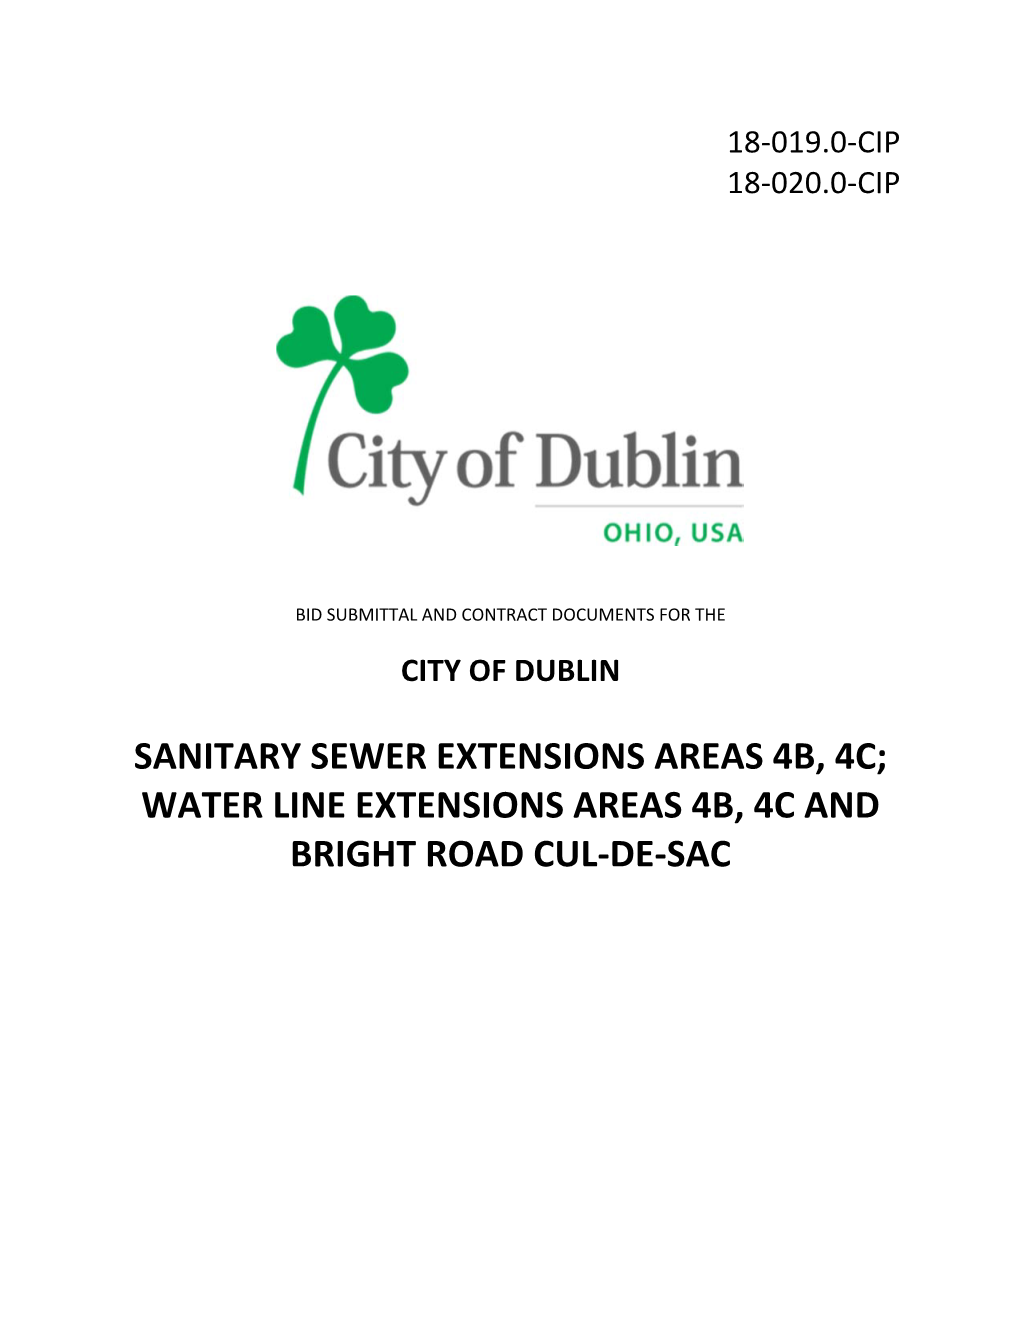 Sanitary Sewer Extensions Areas 4B, 4C; Water Line Extensions Areas 4B, 4C and Bright Road Cul‐De‐Sac